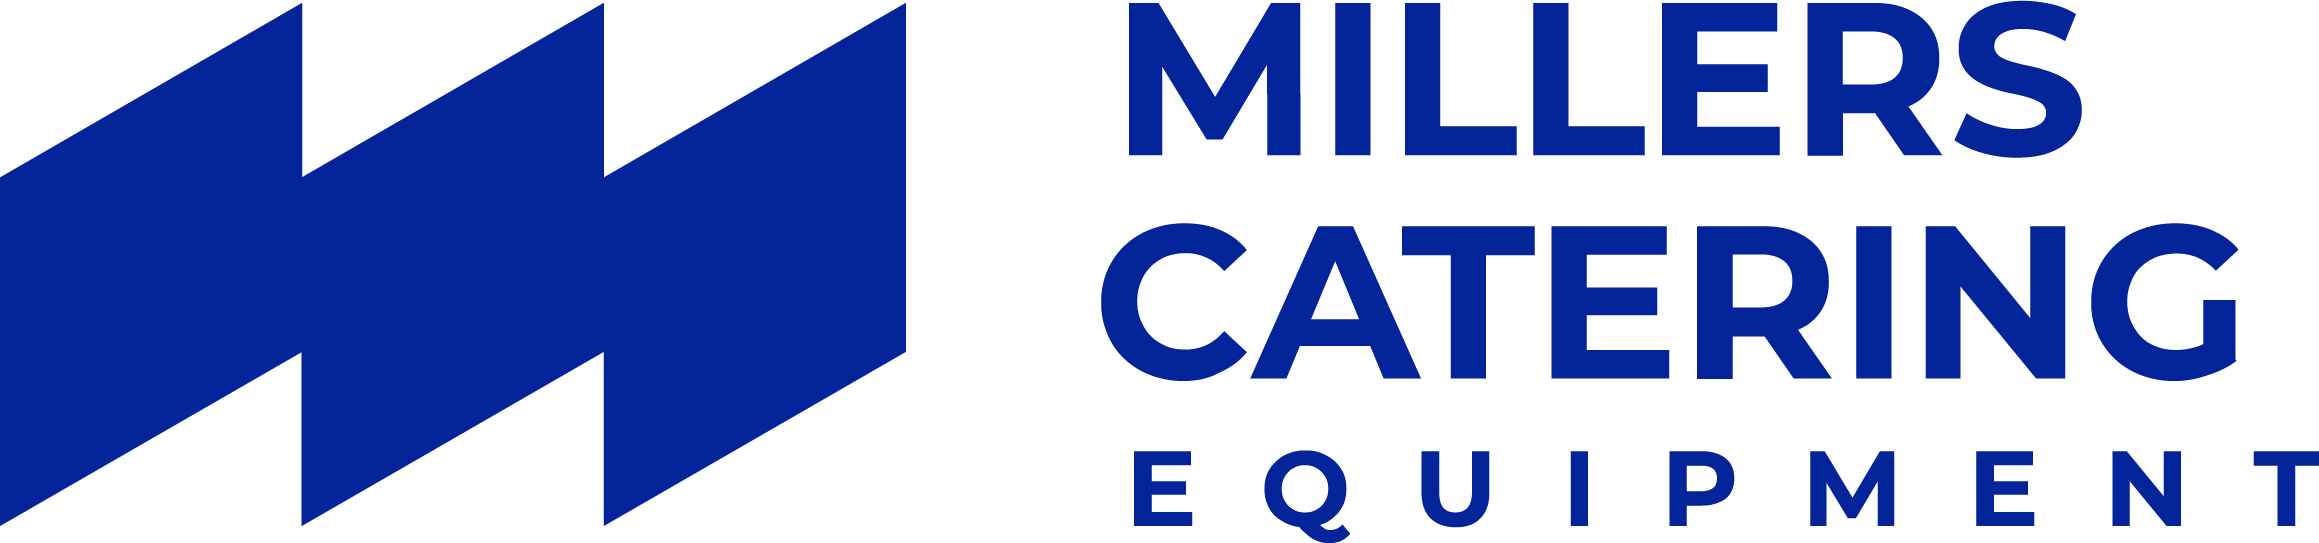 logo for Millers Catering Equipment